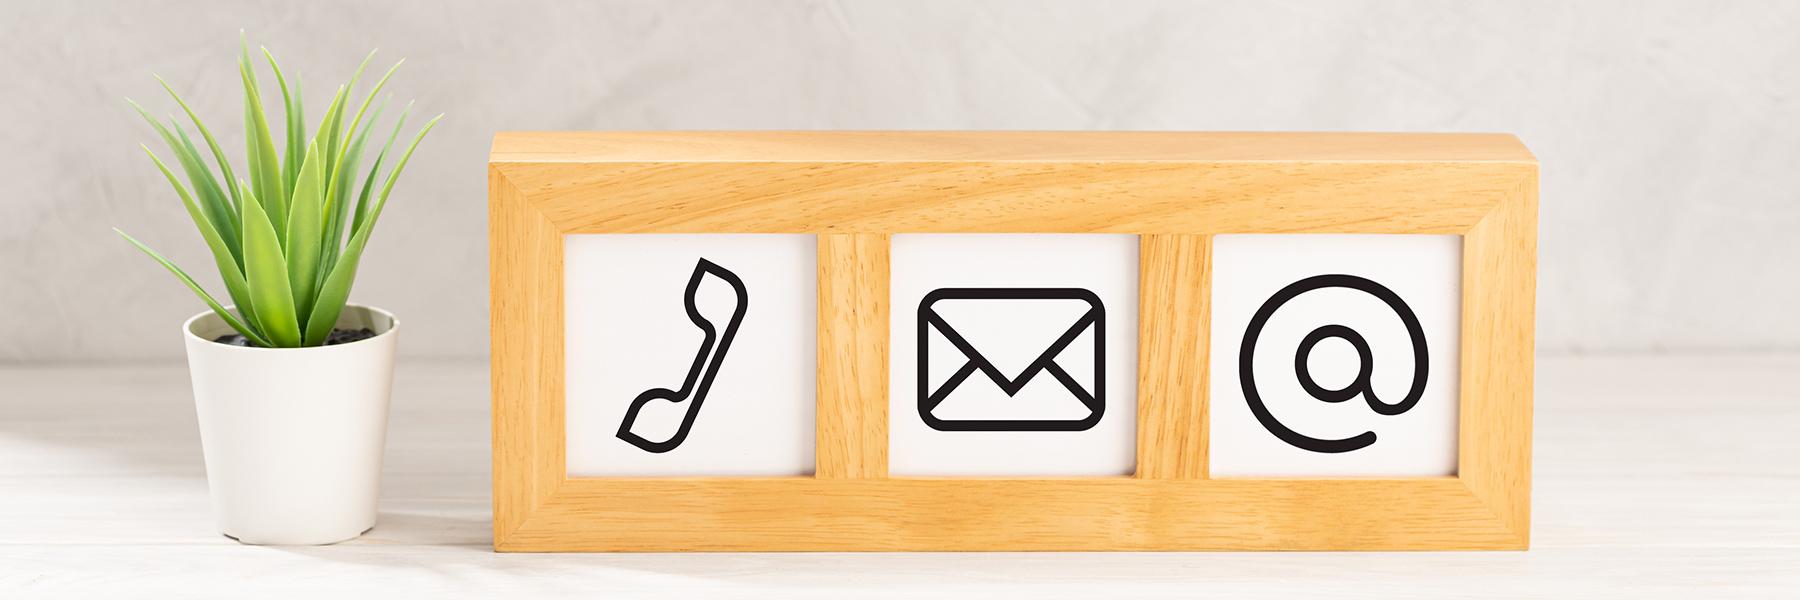 wood block with phone, email and @ symbol